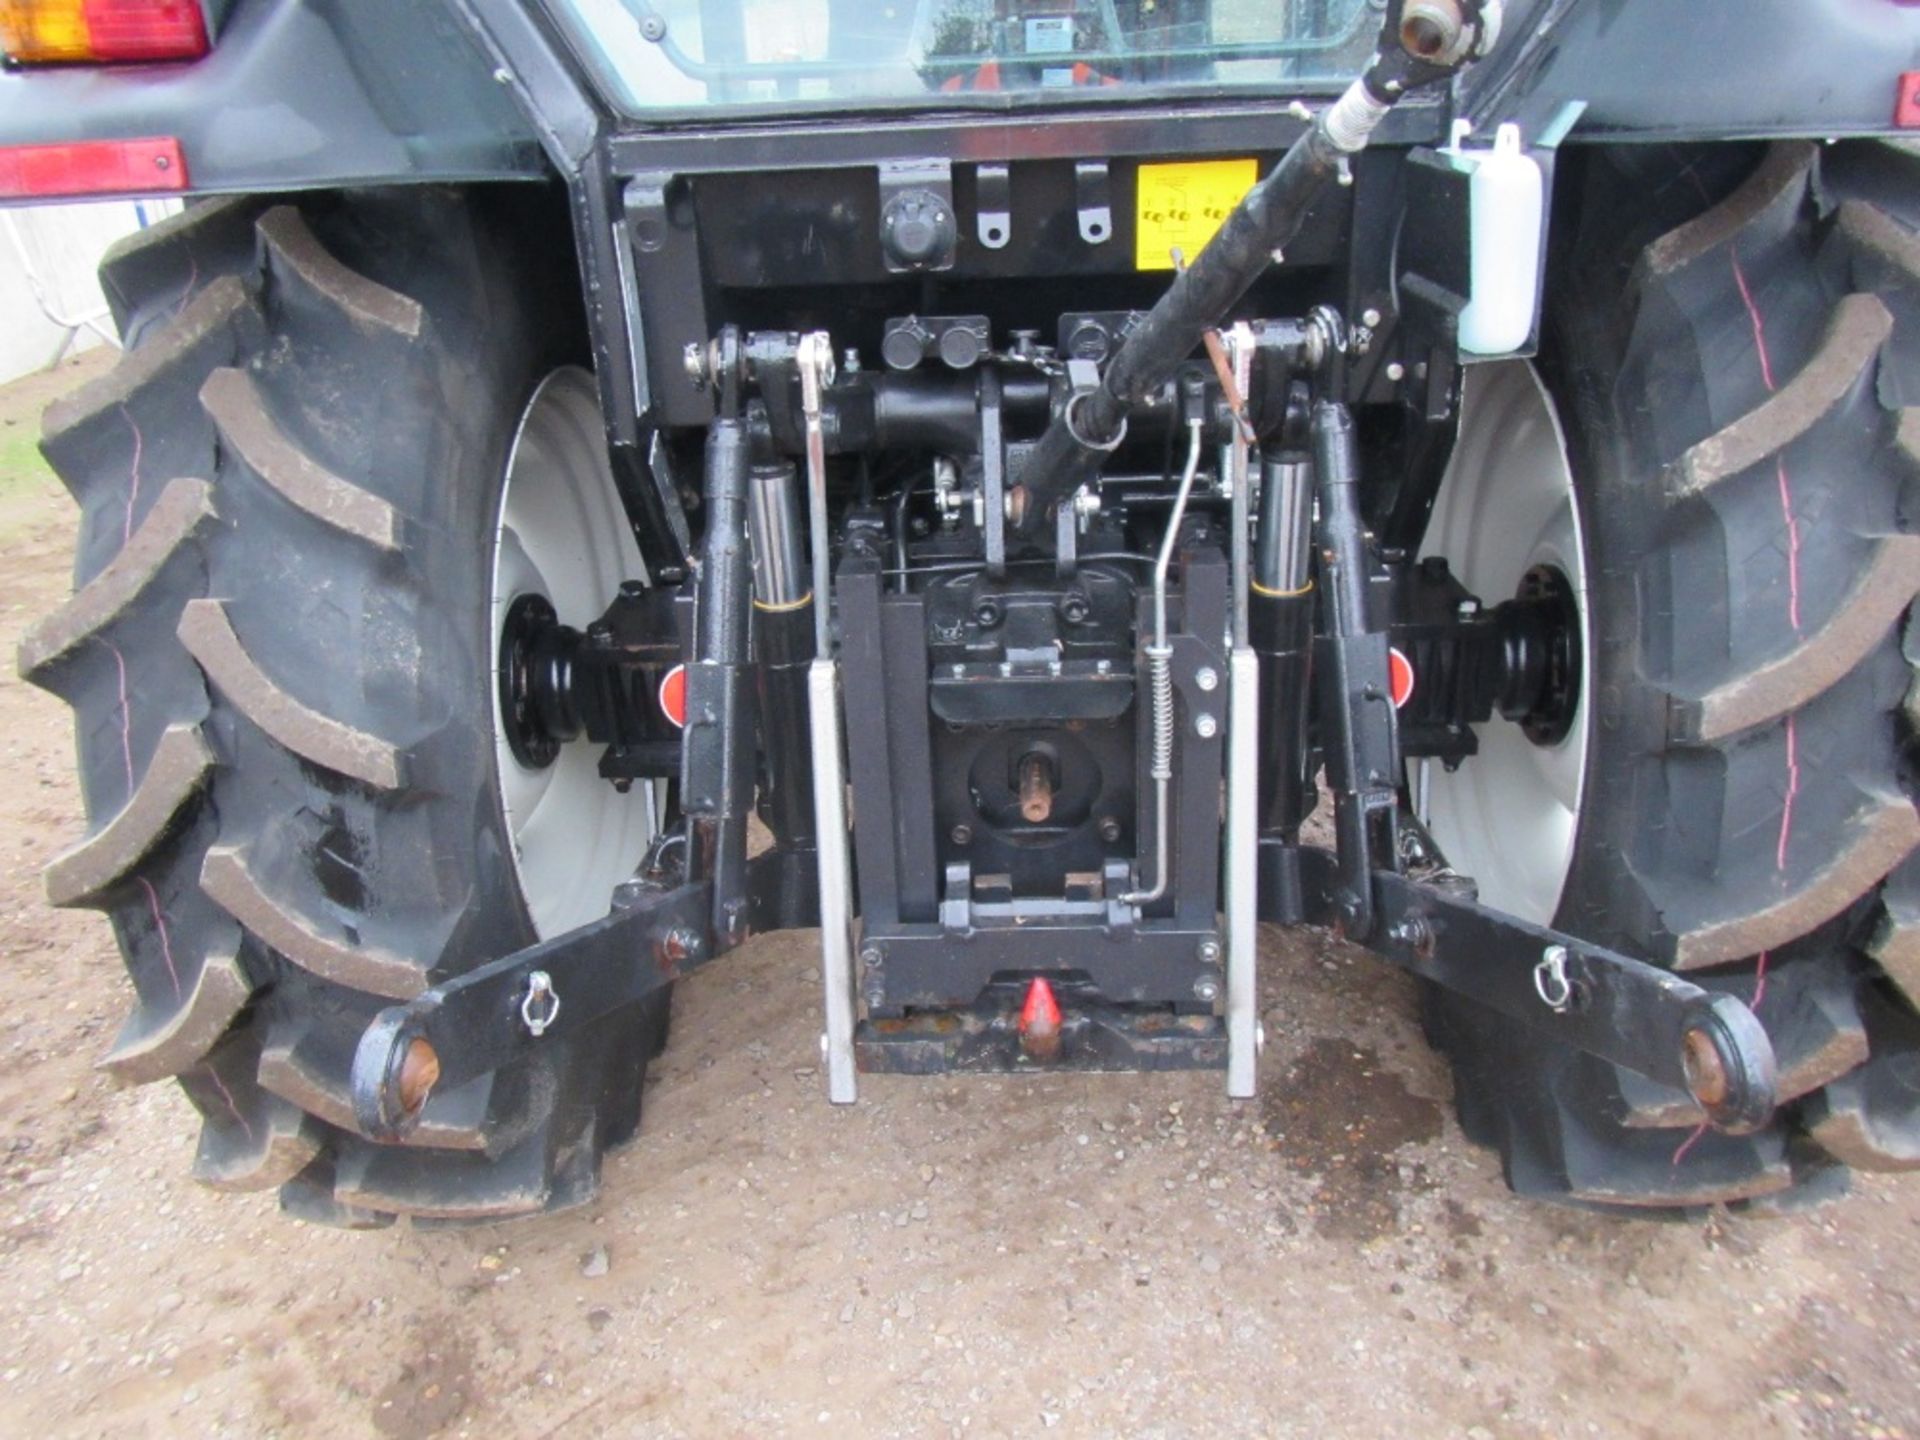 2015 Valtra A73C 4wd Tractor 40k, 12+12 Synchro, Mechanical Shuttle, 2 Spools, Air Con, 540/540E - Image 7 of 17